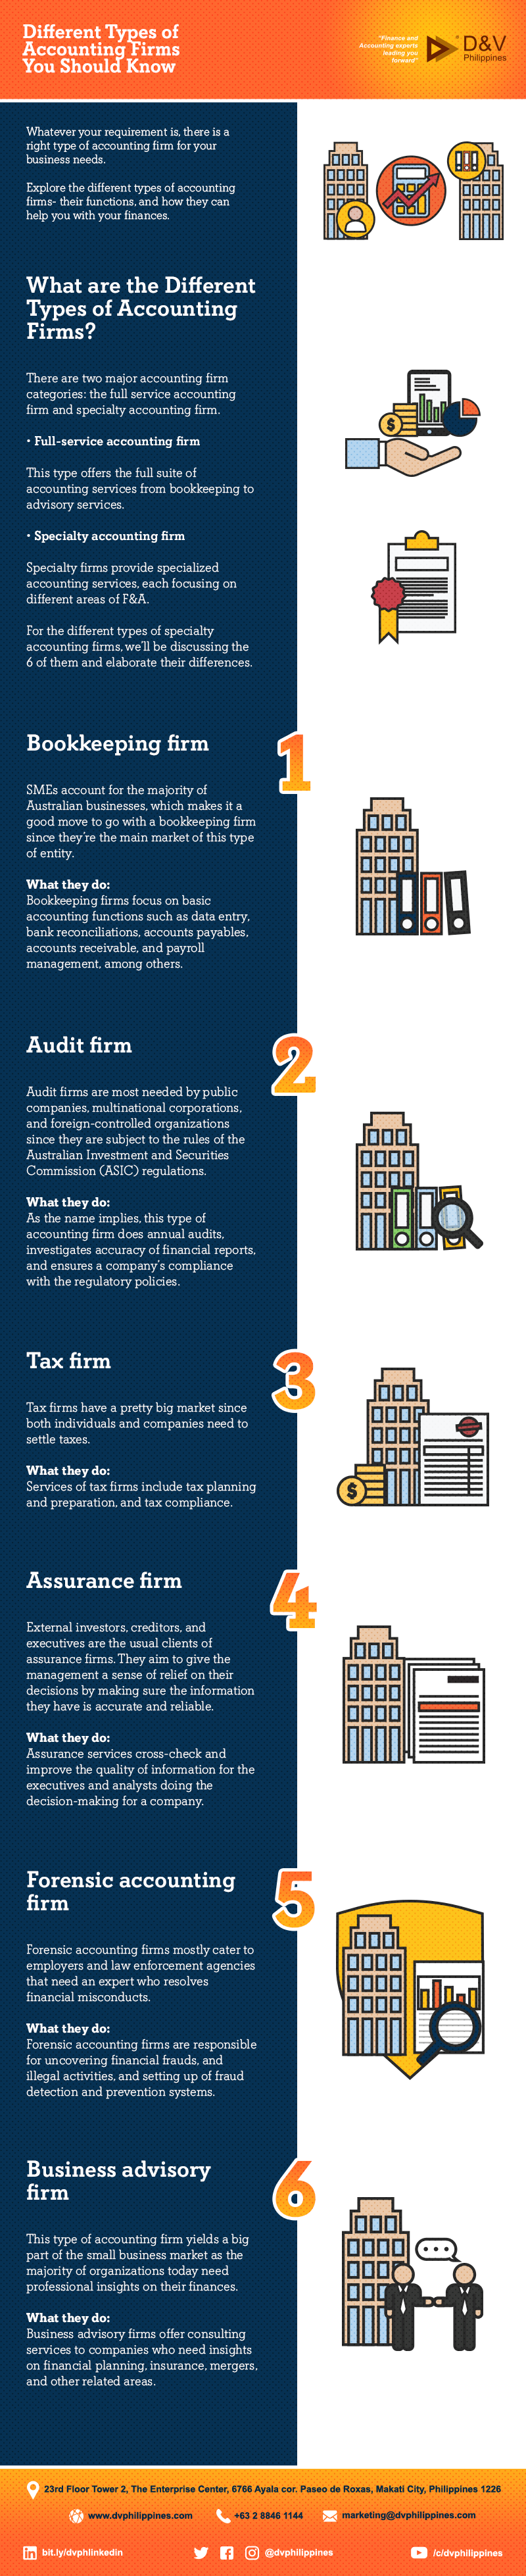 Infog_W_C_Different-Types-of-Accounting-Firms-You-Should-KnowMain